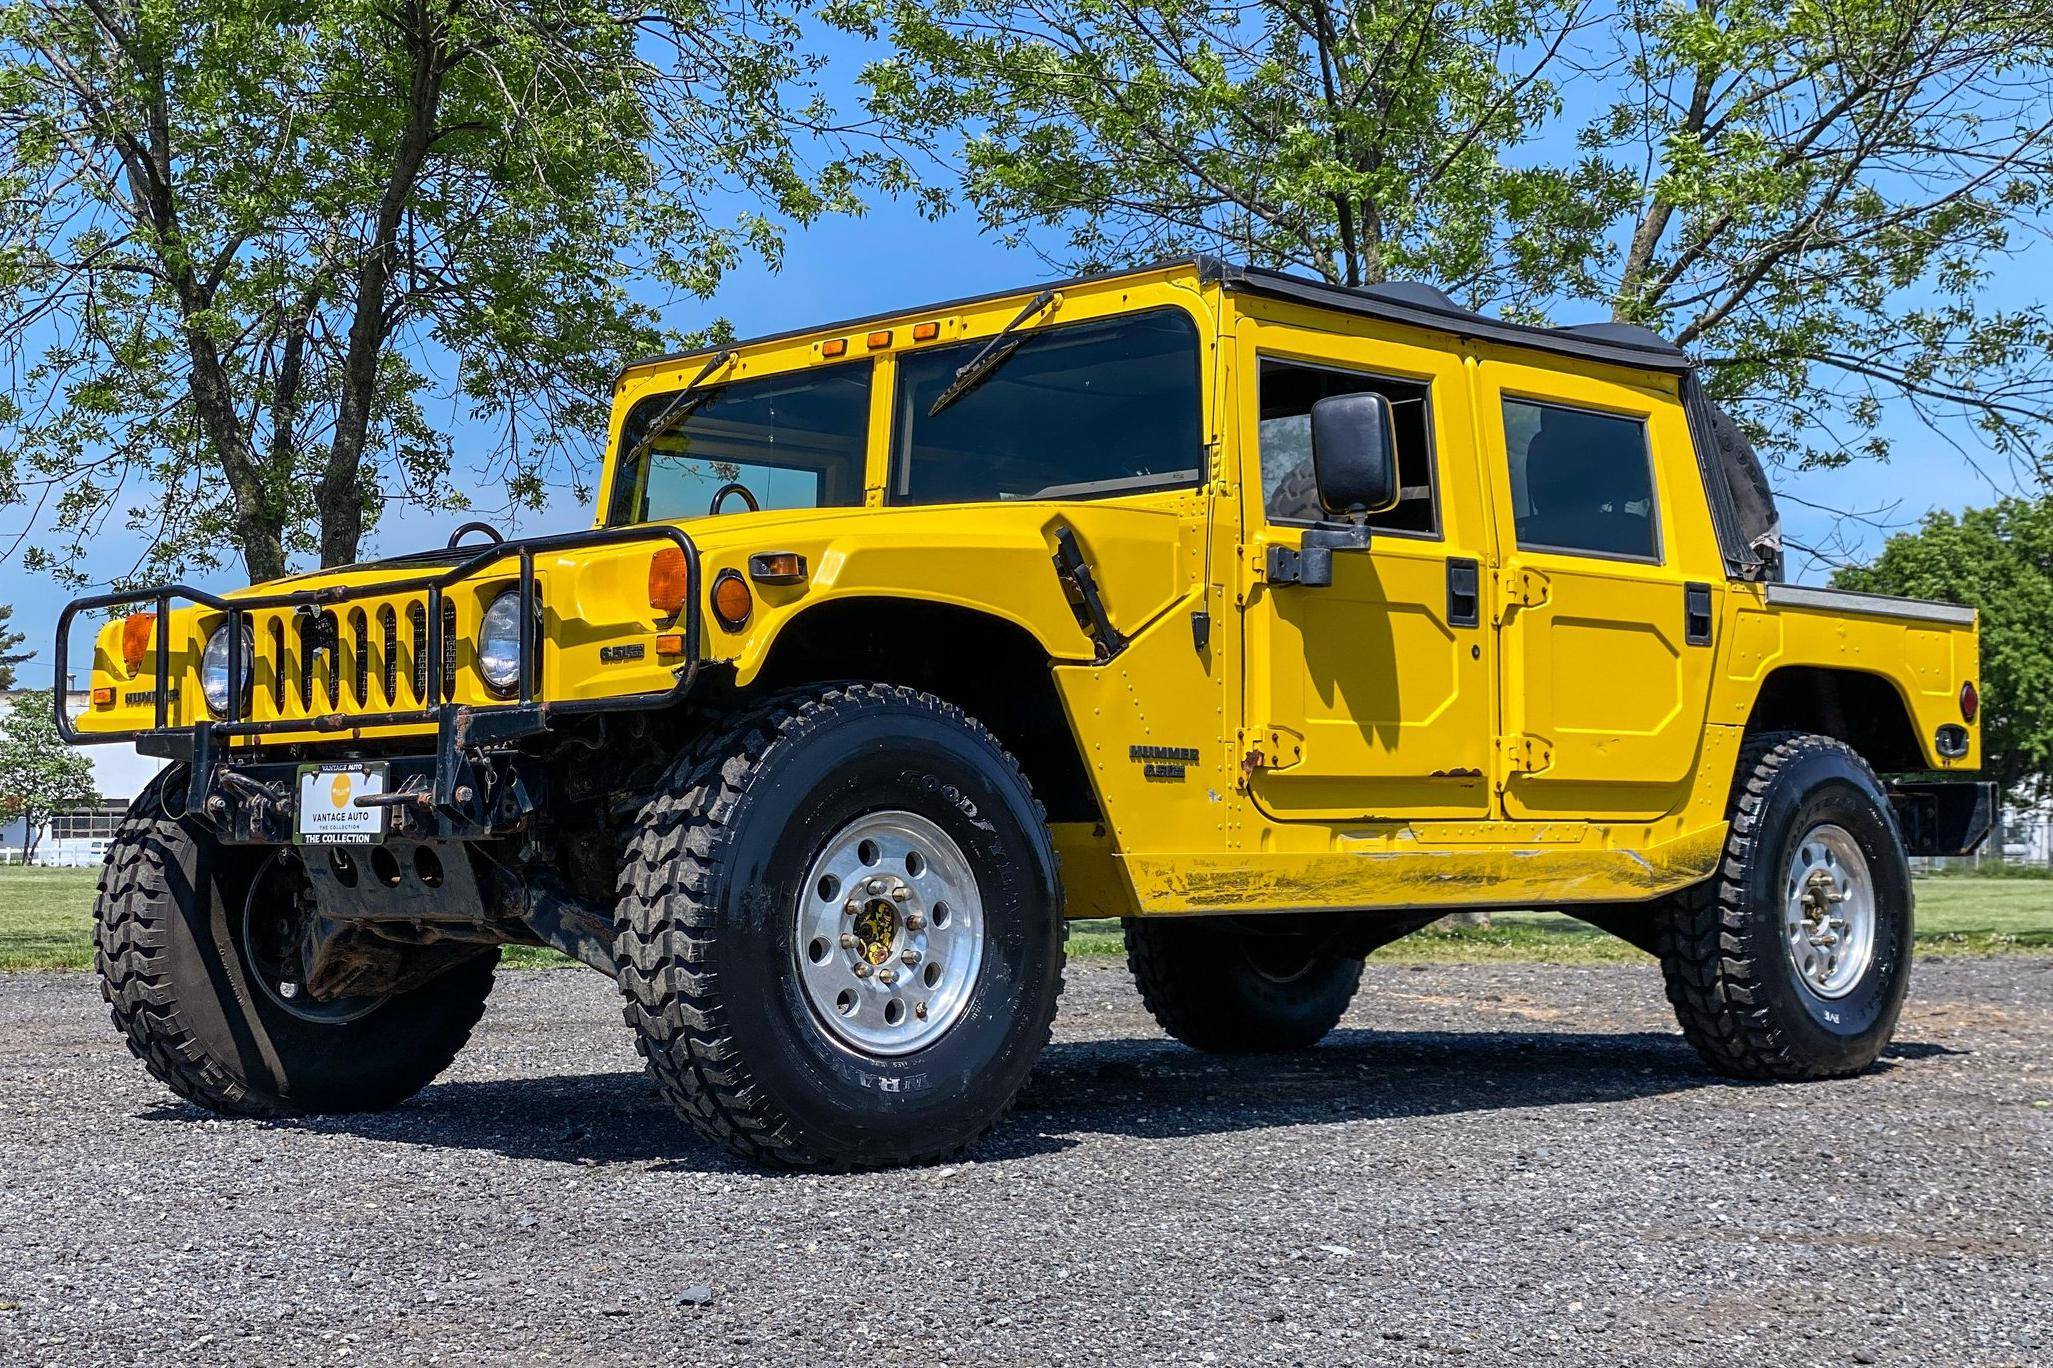 Hummer Car Collection A Symbol of Power and Style